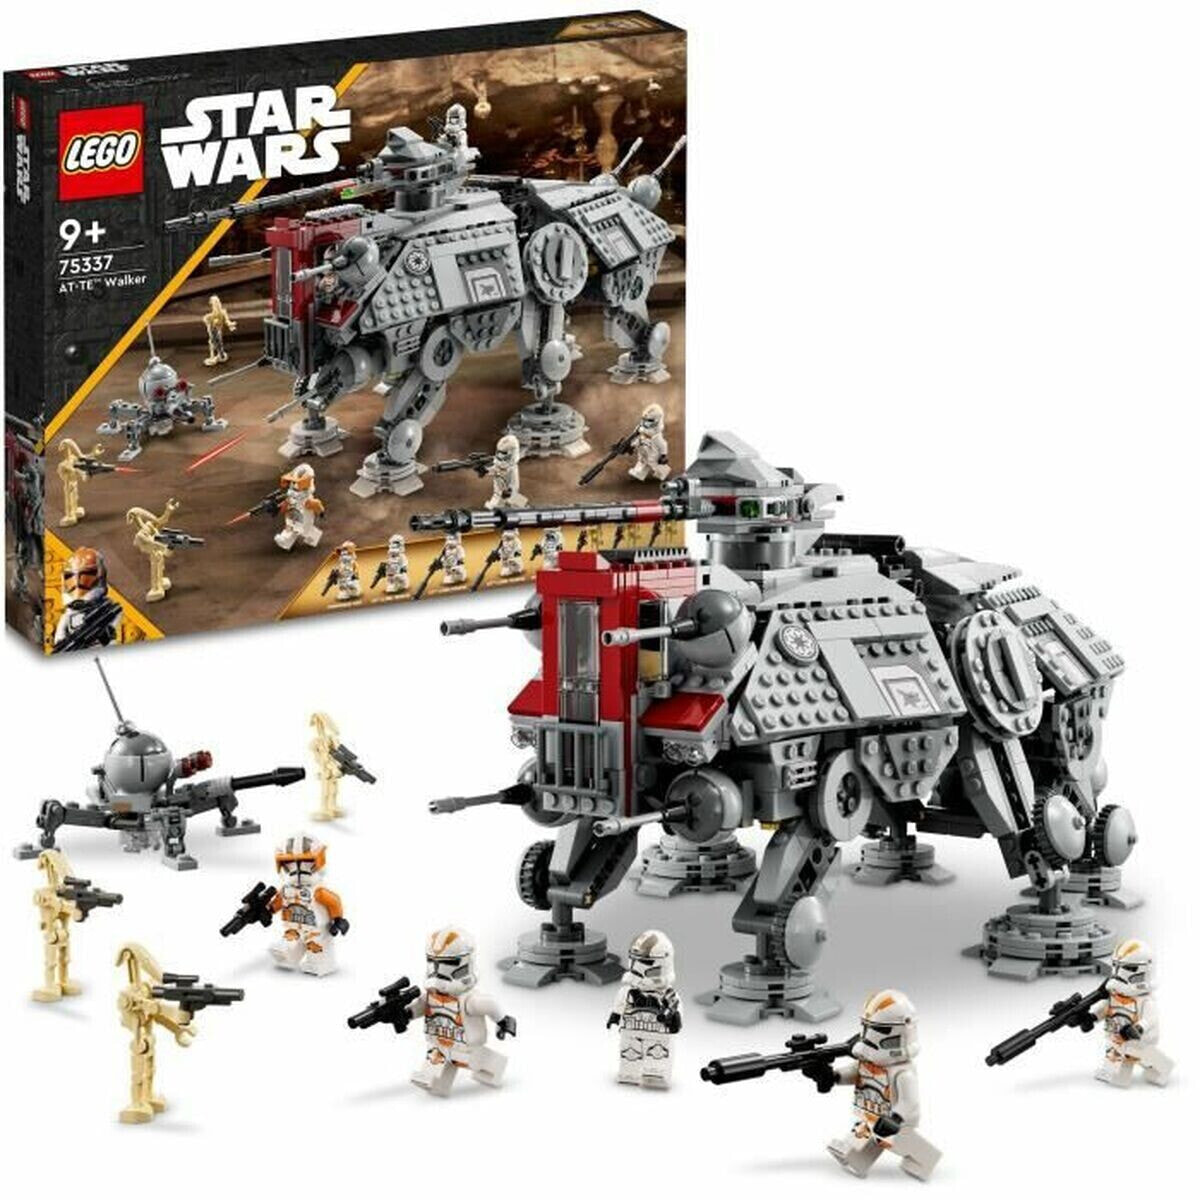 Playset Lego Star Wars 75337 AT-TE Walker 1082 Pieces